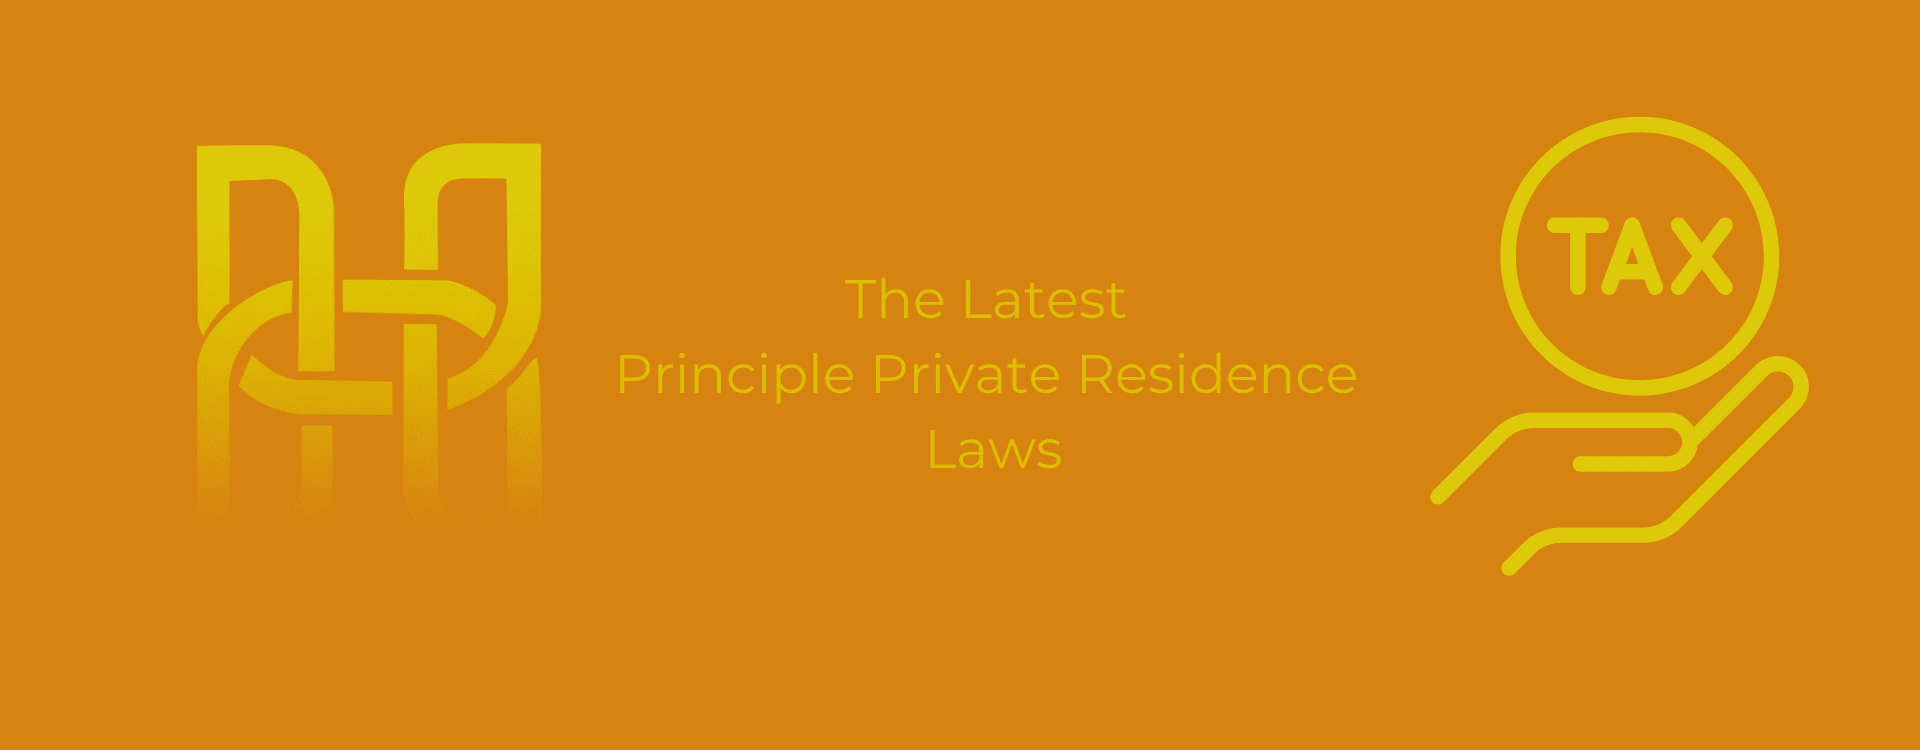 Principle Private Residence laws